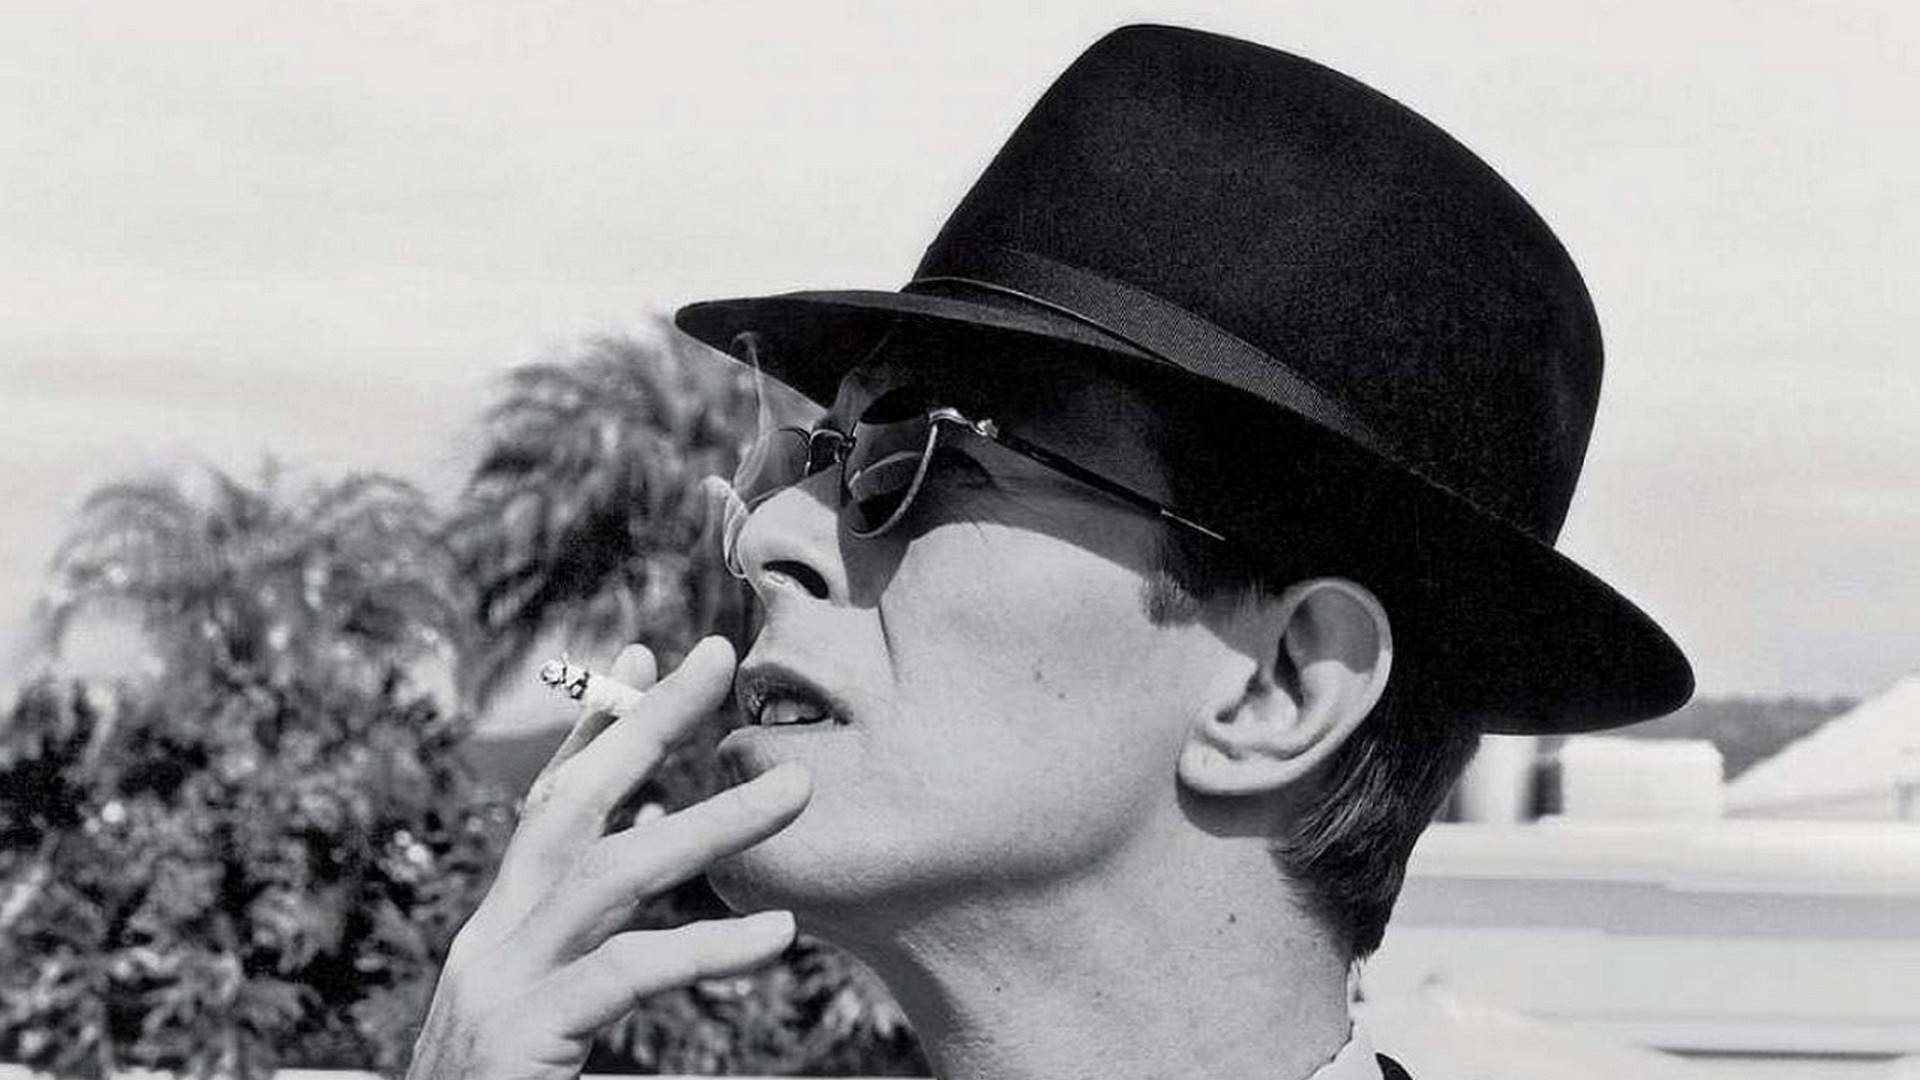 David Bowie With Hat And Sunglasses Background